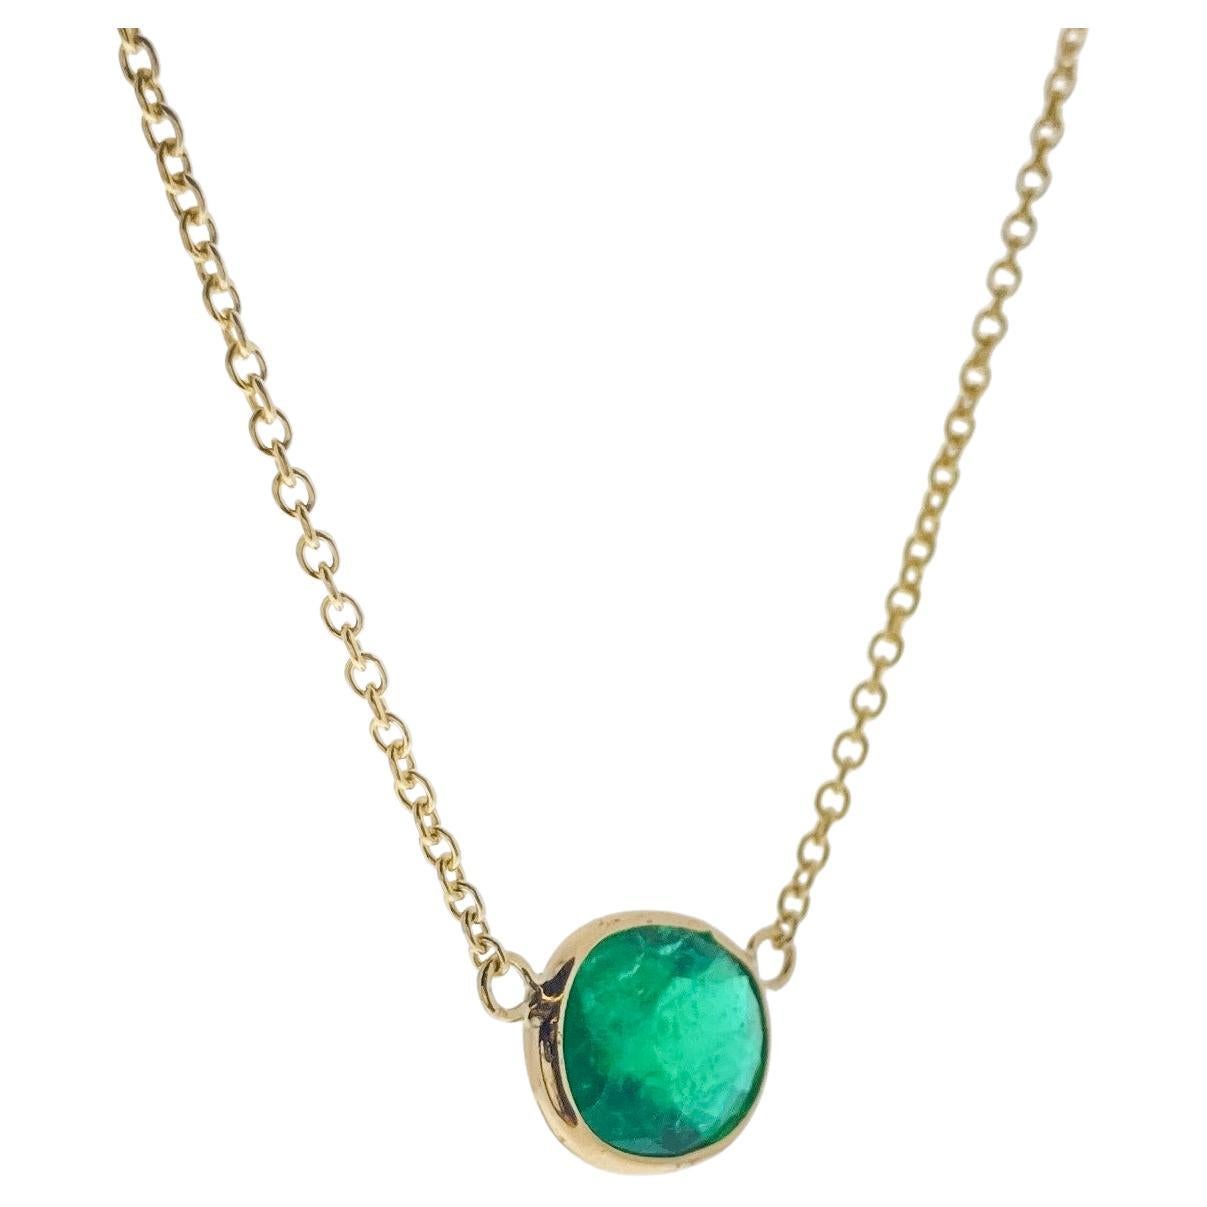 1.65 Carat Green Emerald Oval Cut Fashion Necklaces In 14K Yellow Gold For Sale